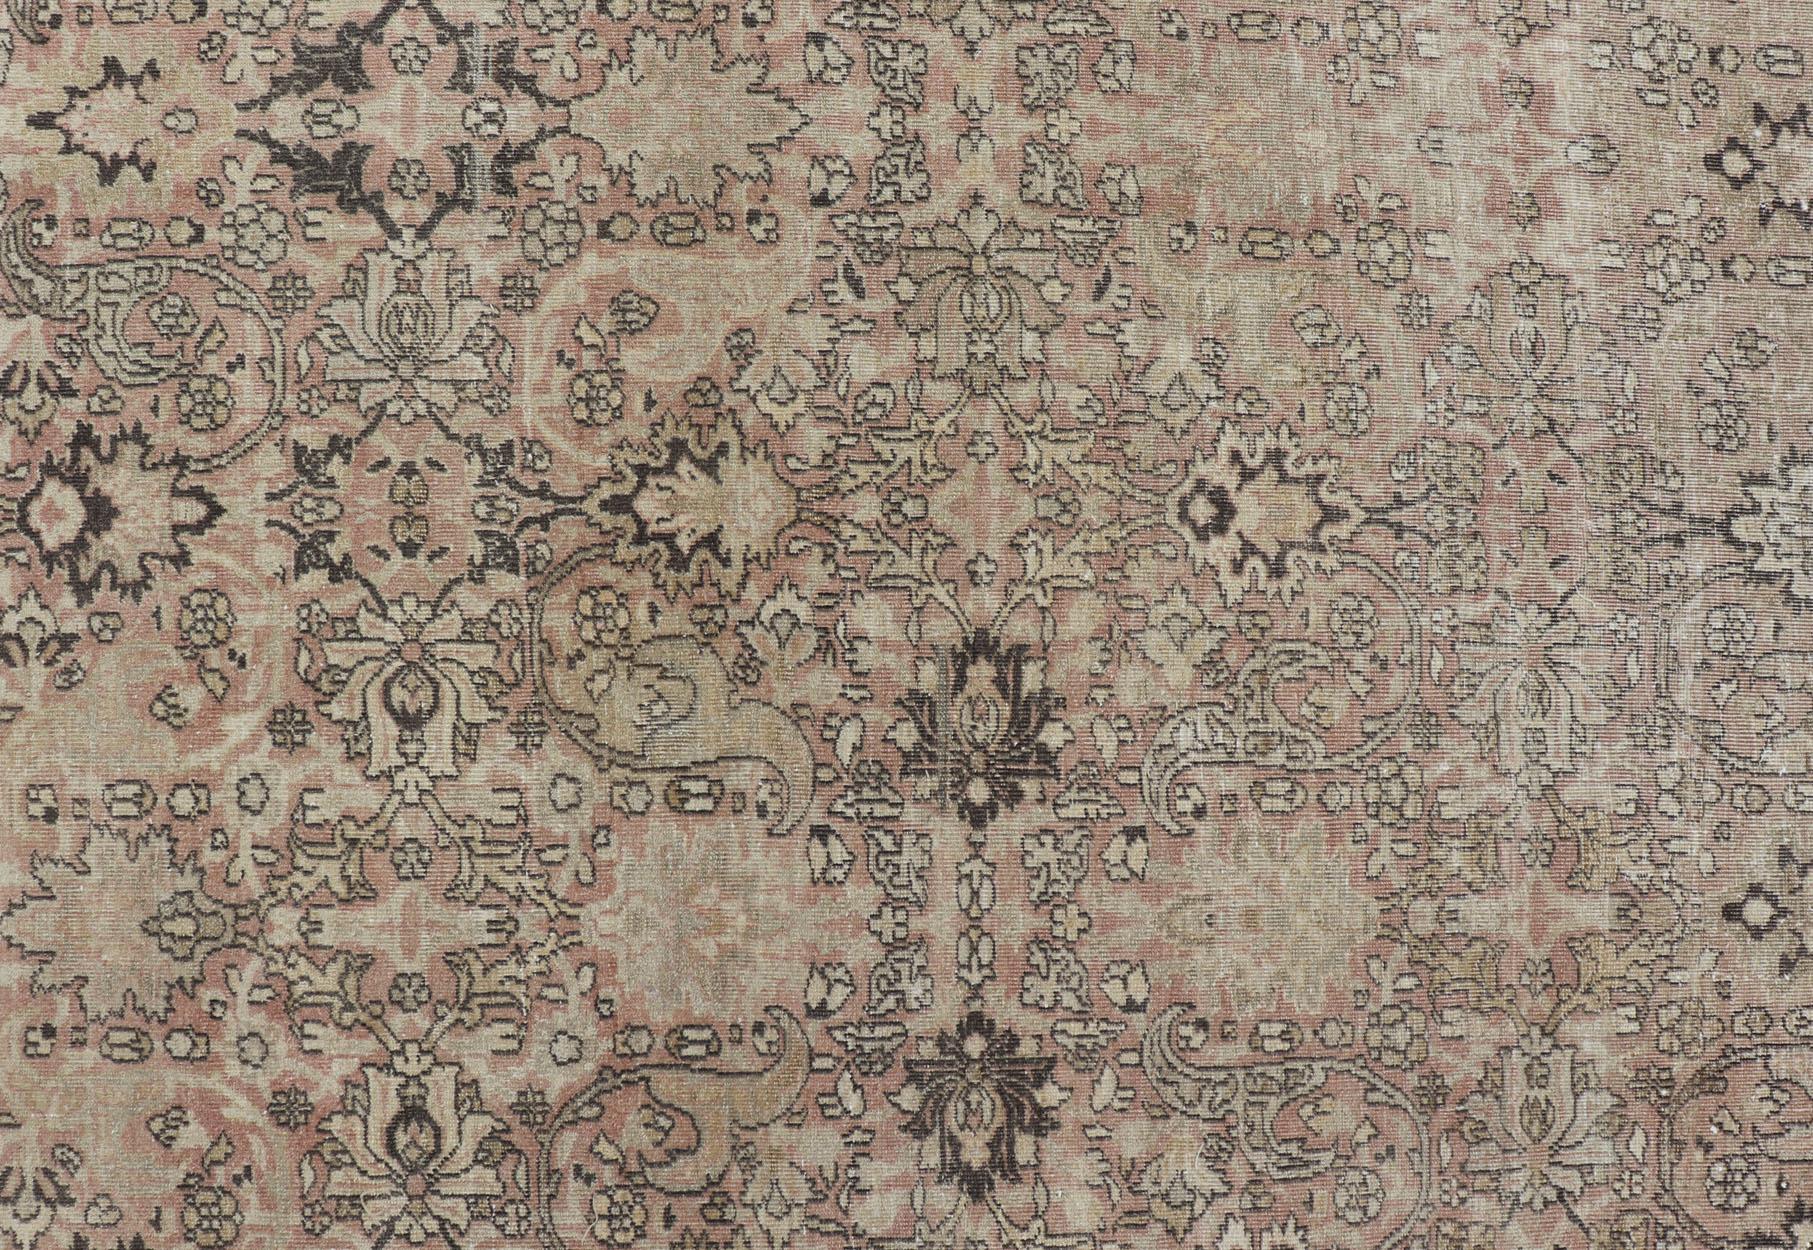 Large Antique Turkish Sivas Rug with Floral Design in Earthy Neutral Tones  For Sale 1